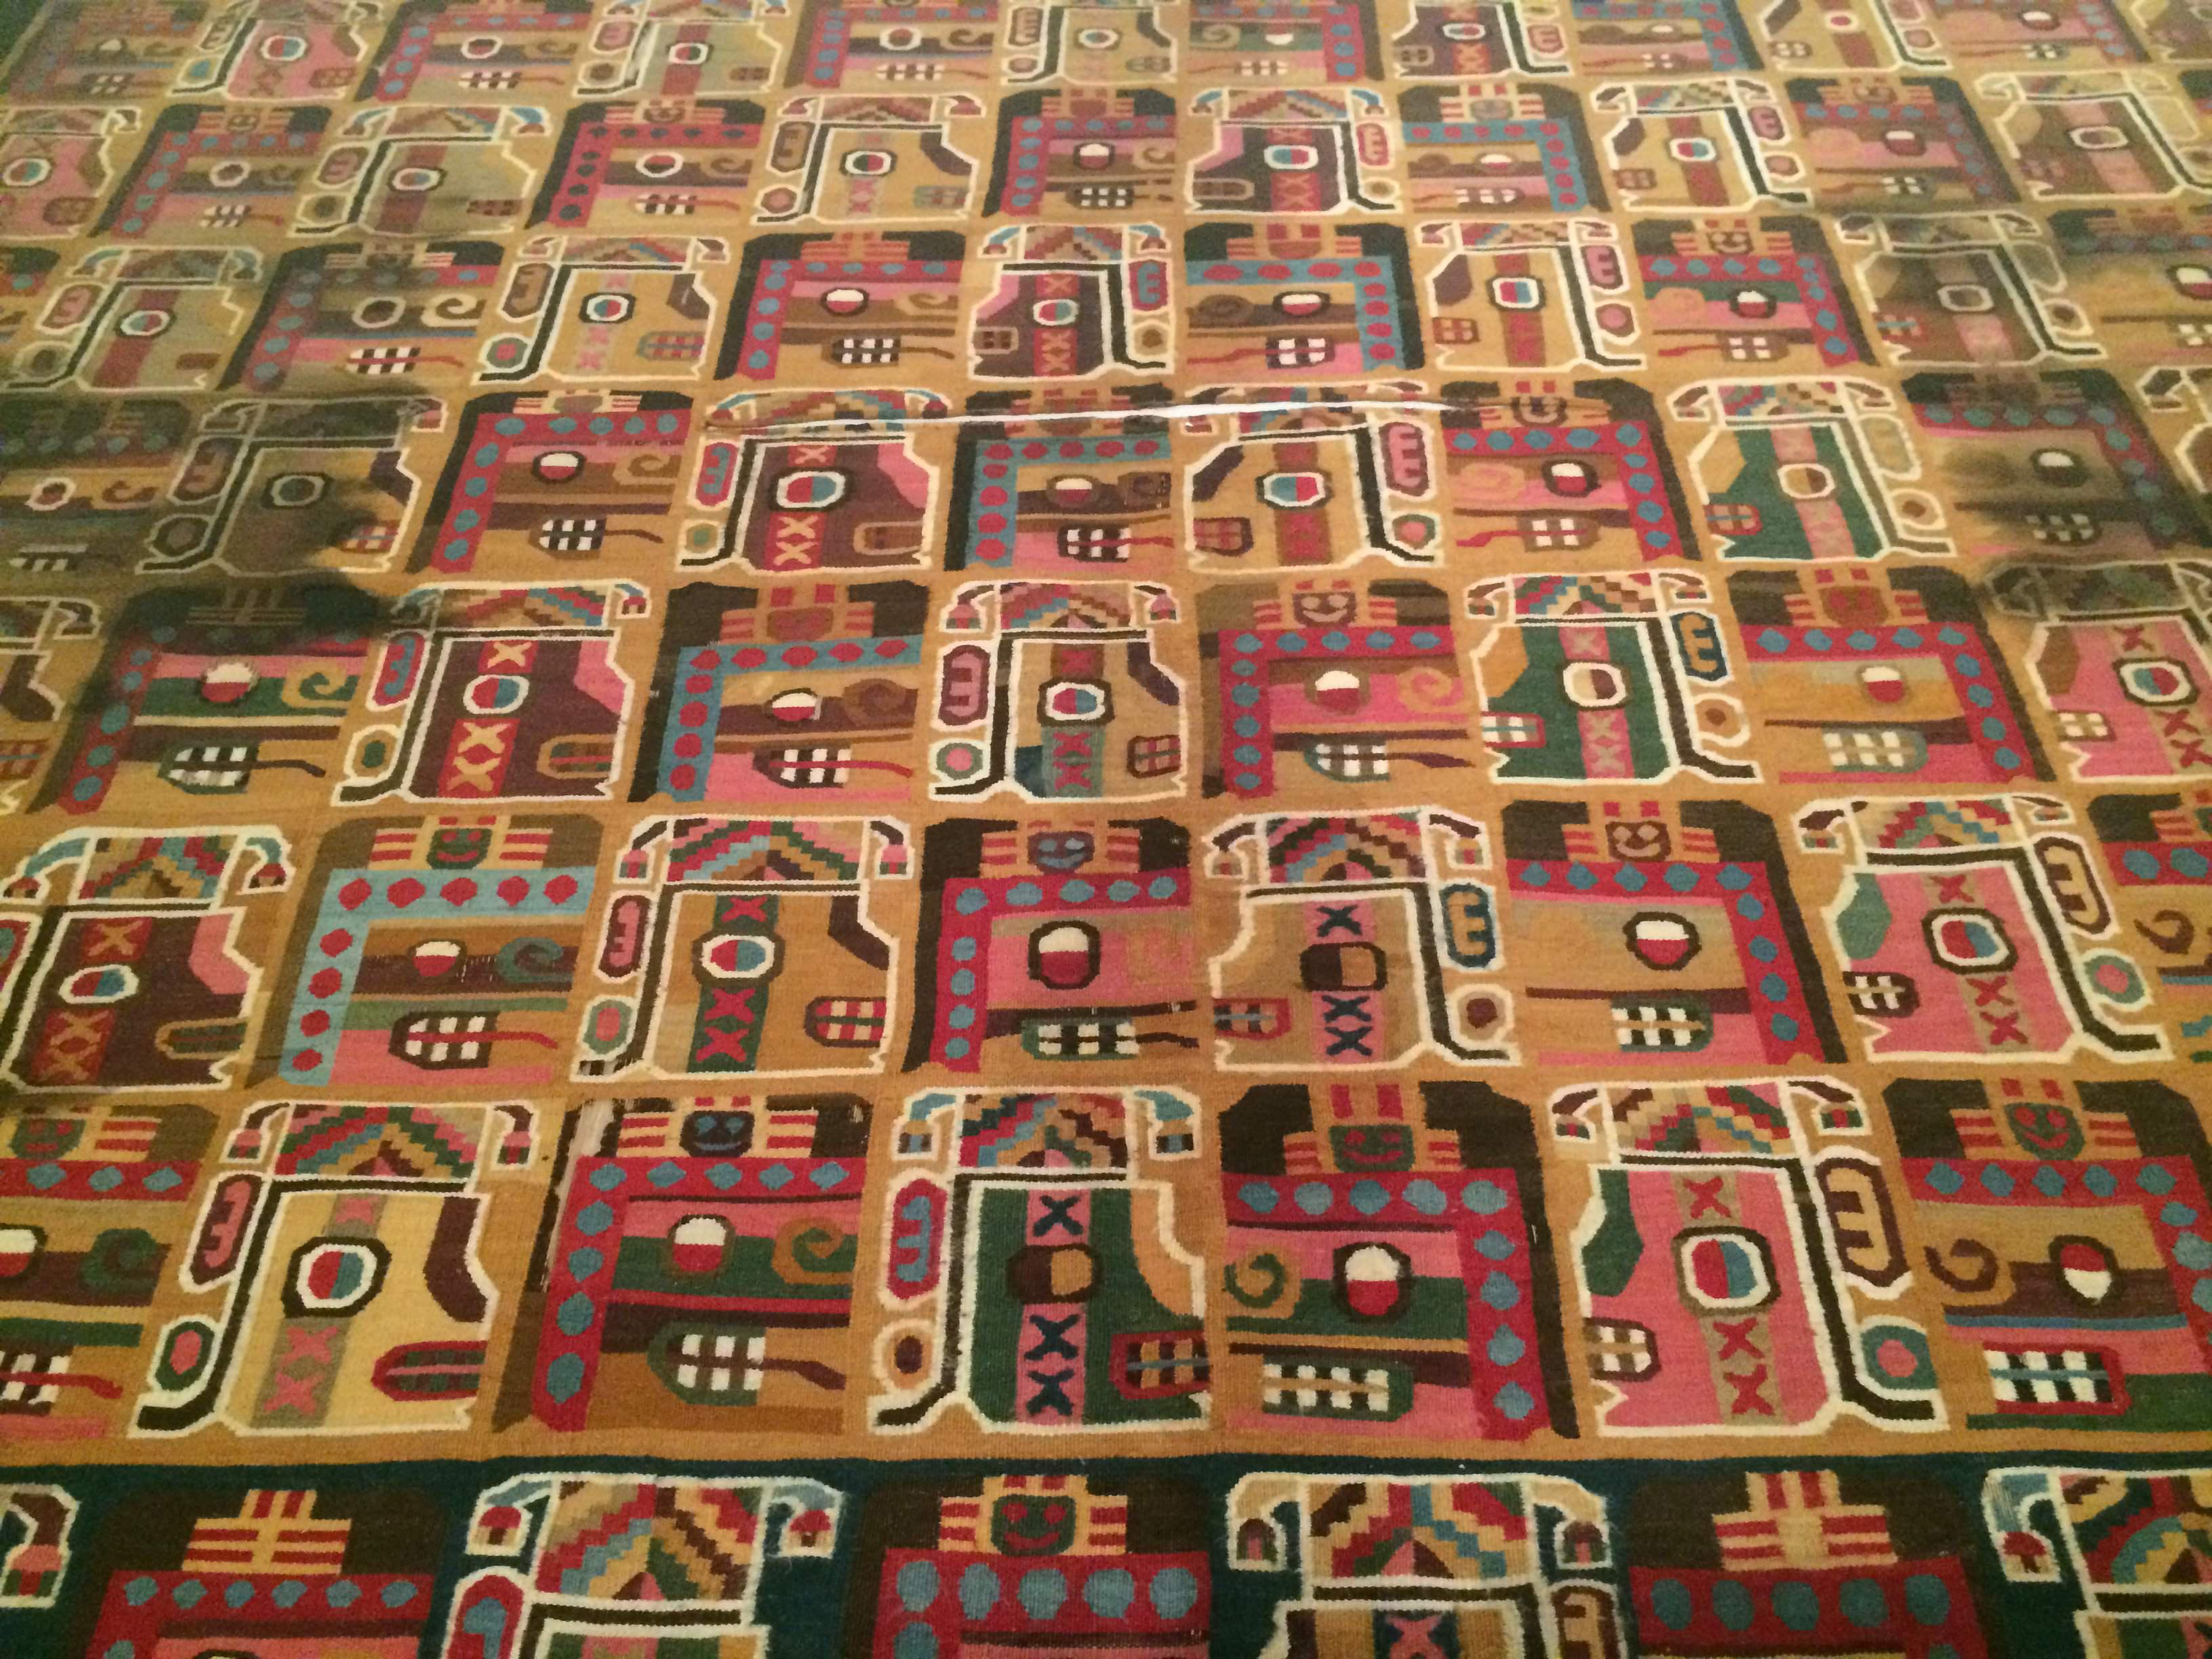 A Wari tapestry panel from Peru. 600-1000 CE, now housed at the Brooklyn Museum.jpg